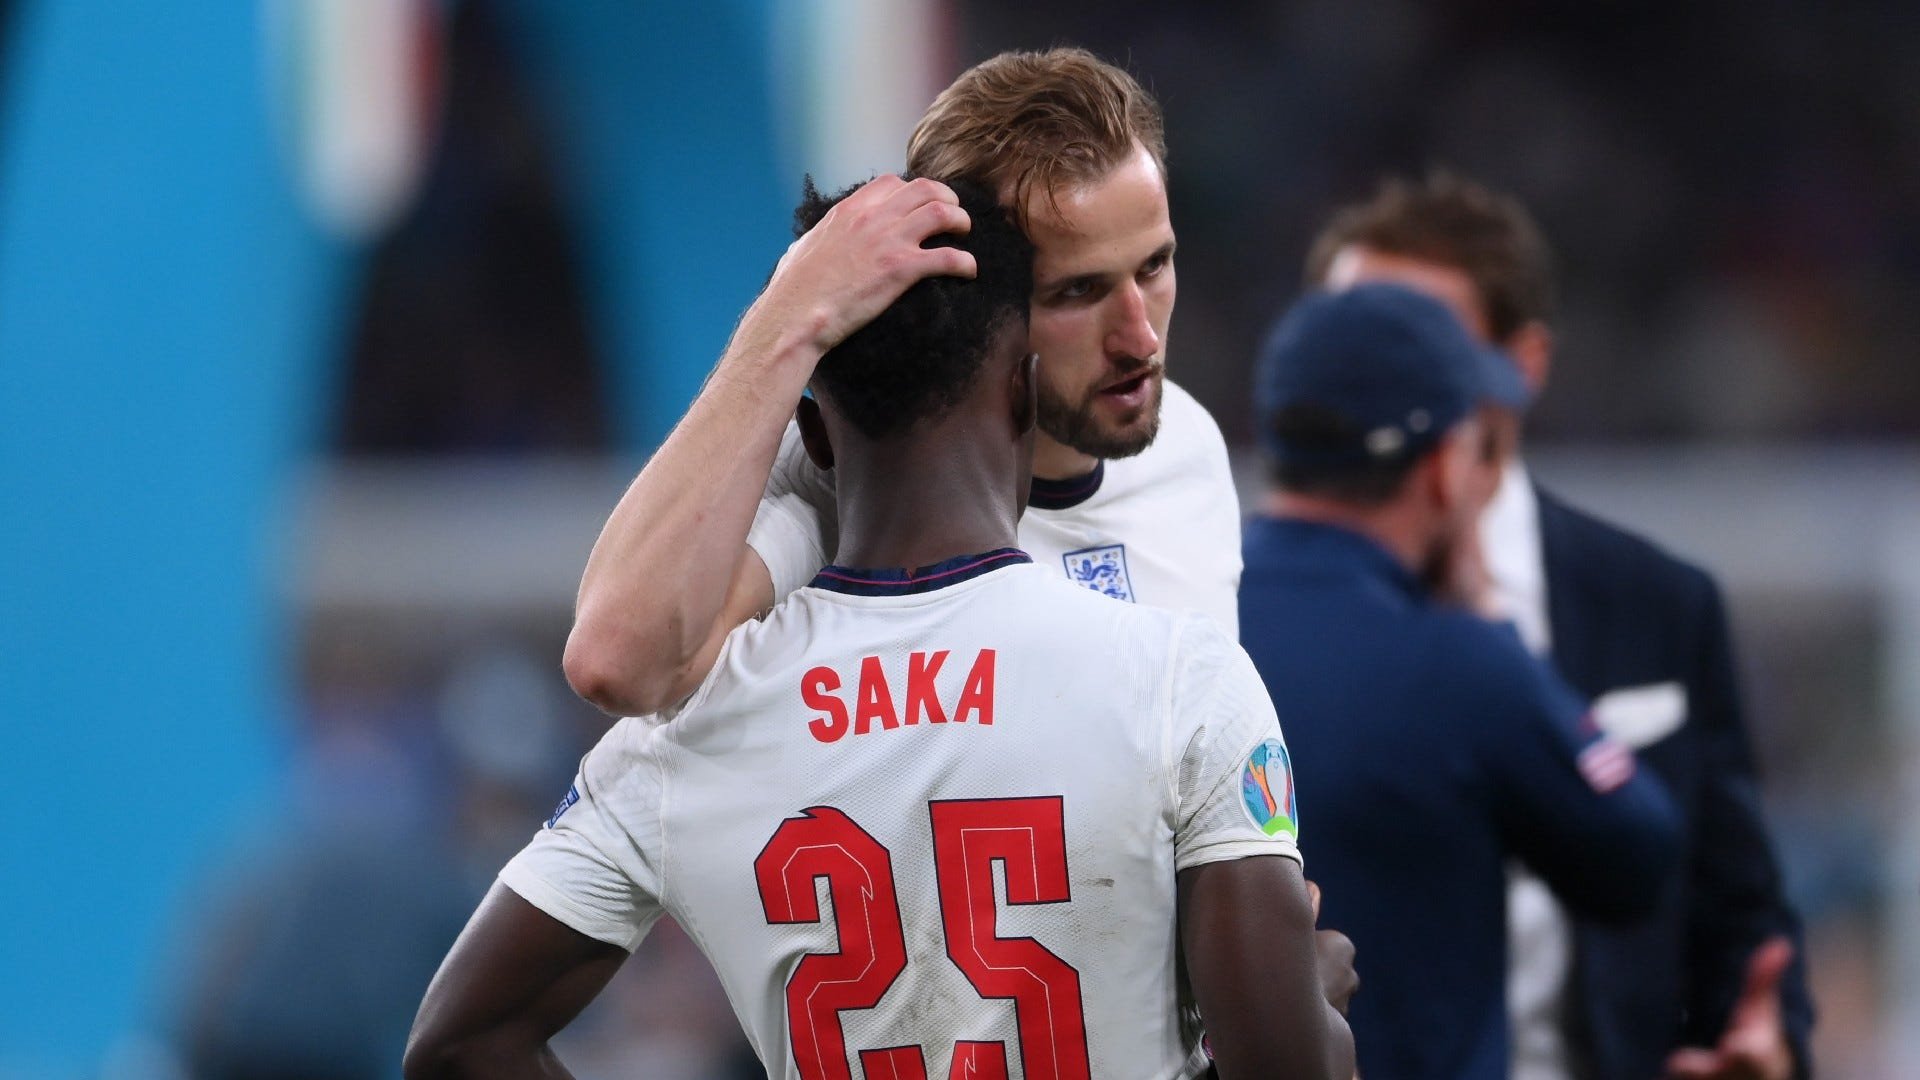 'You’re not a fan and we don’t want you' - Kane and England stars leap to team-mates' defence in wake of racist abuse | Goal.com